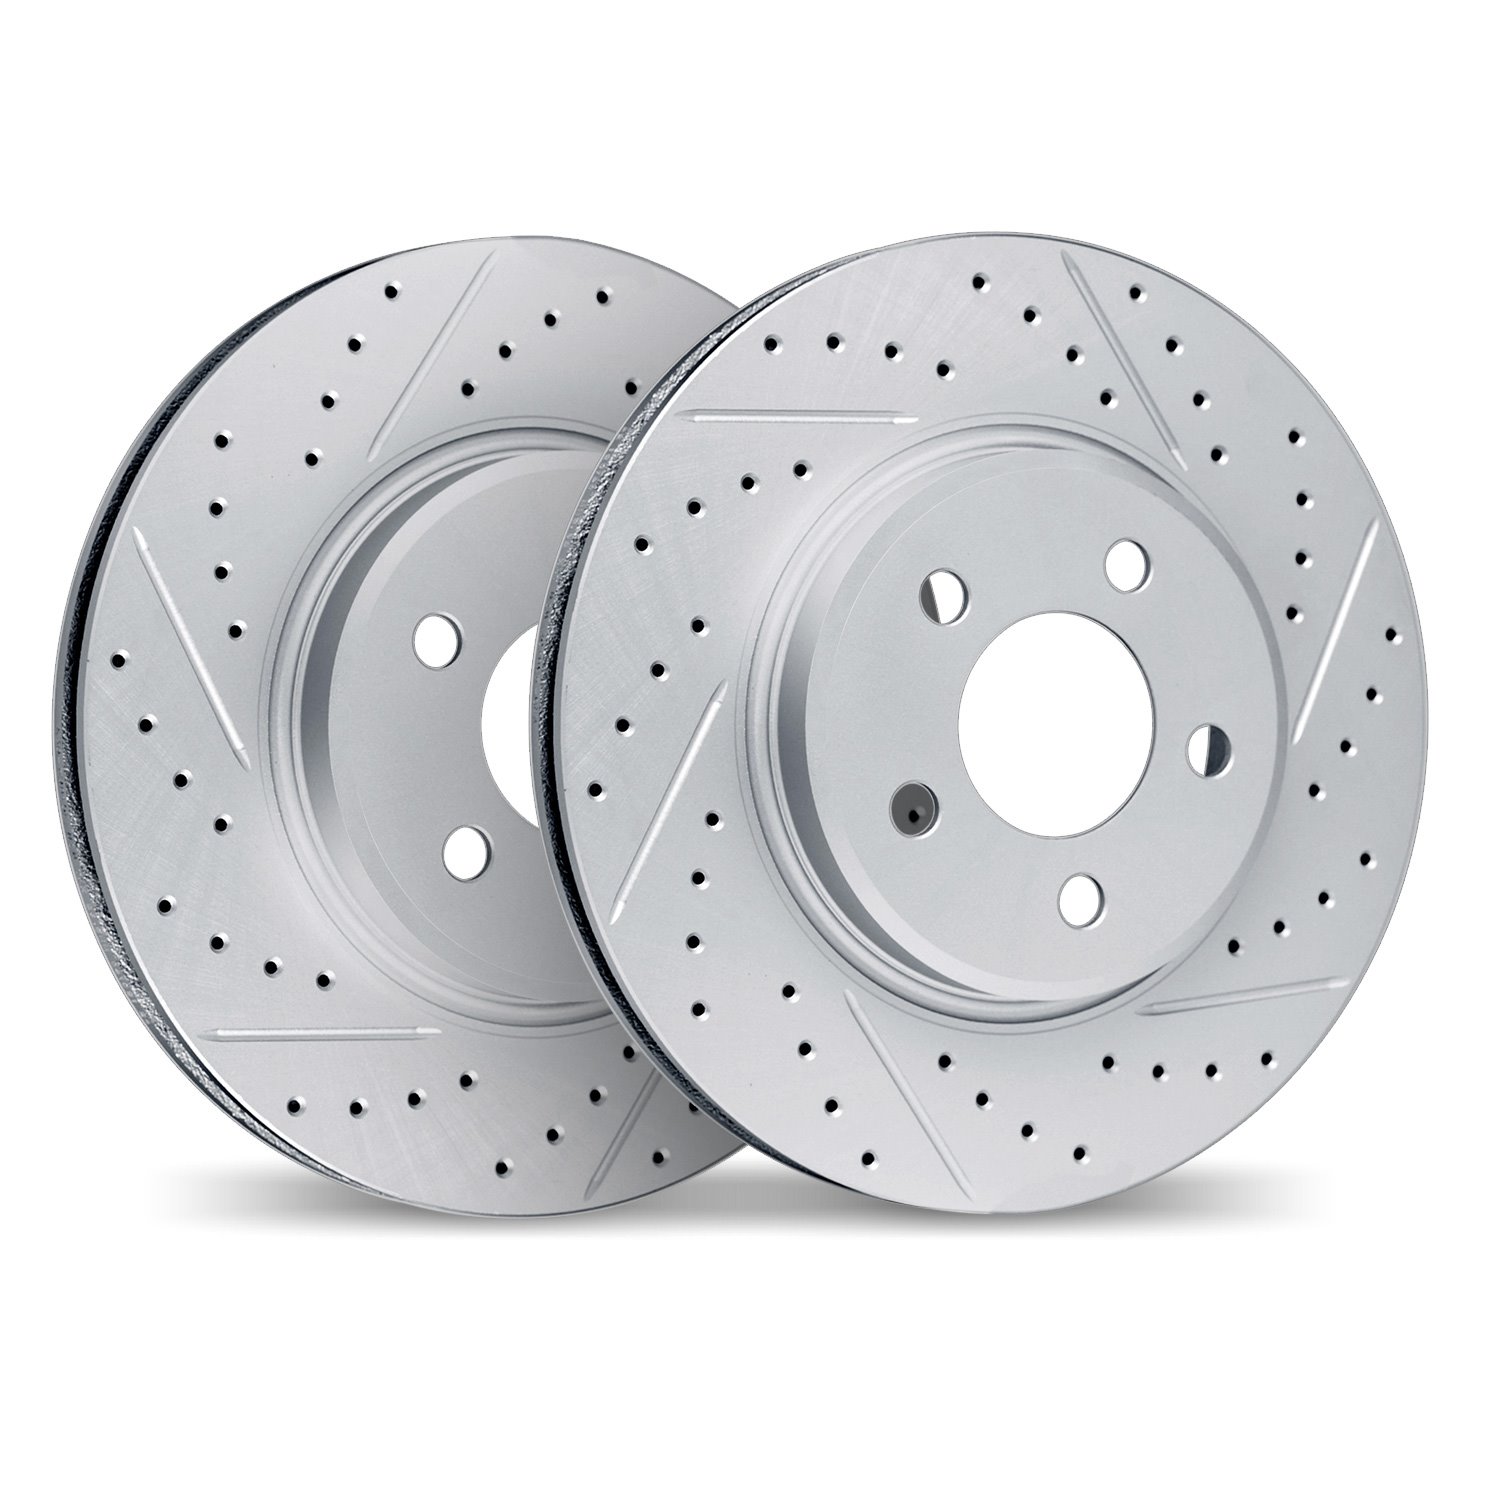 2002-65006 Geoperformance Drilled/Slotted Brake Rotors, 2011-2011 GM, Position: Front